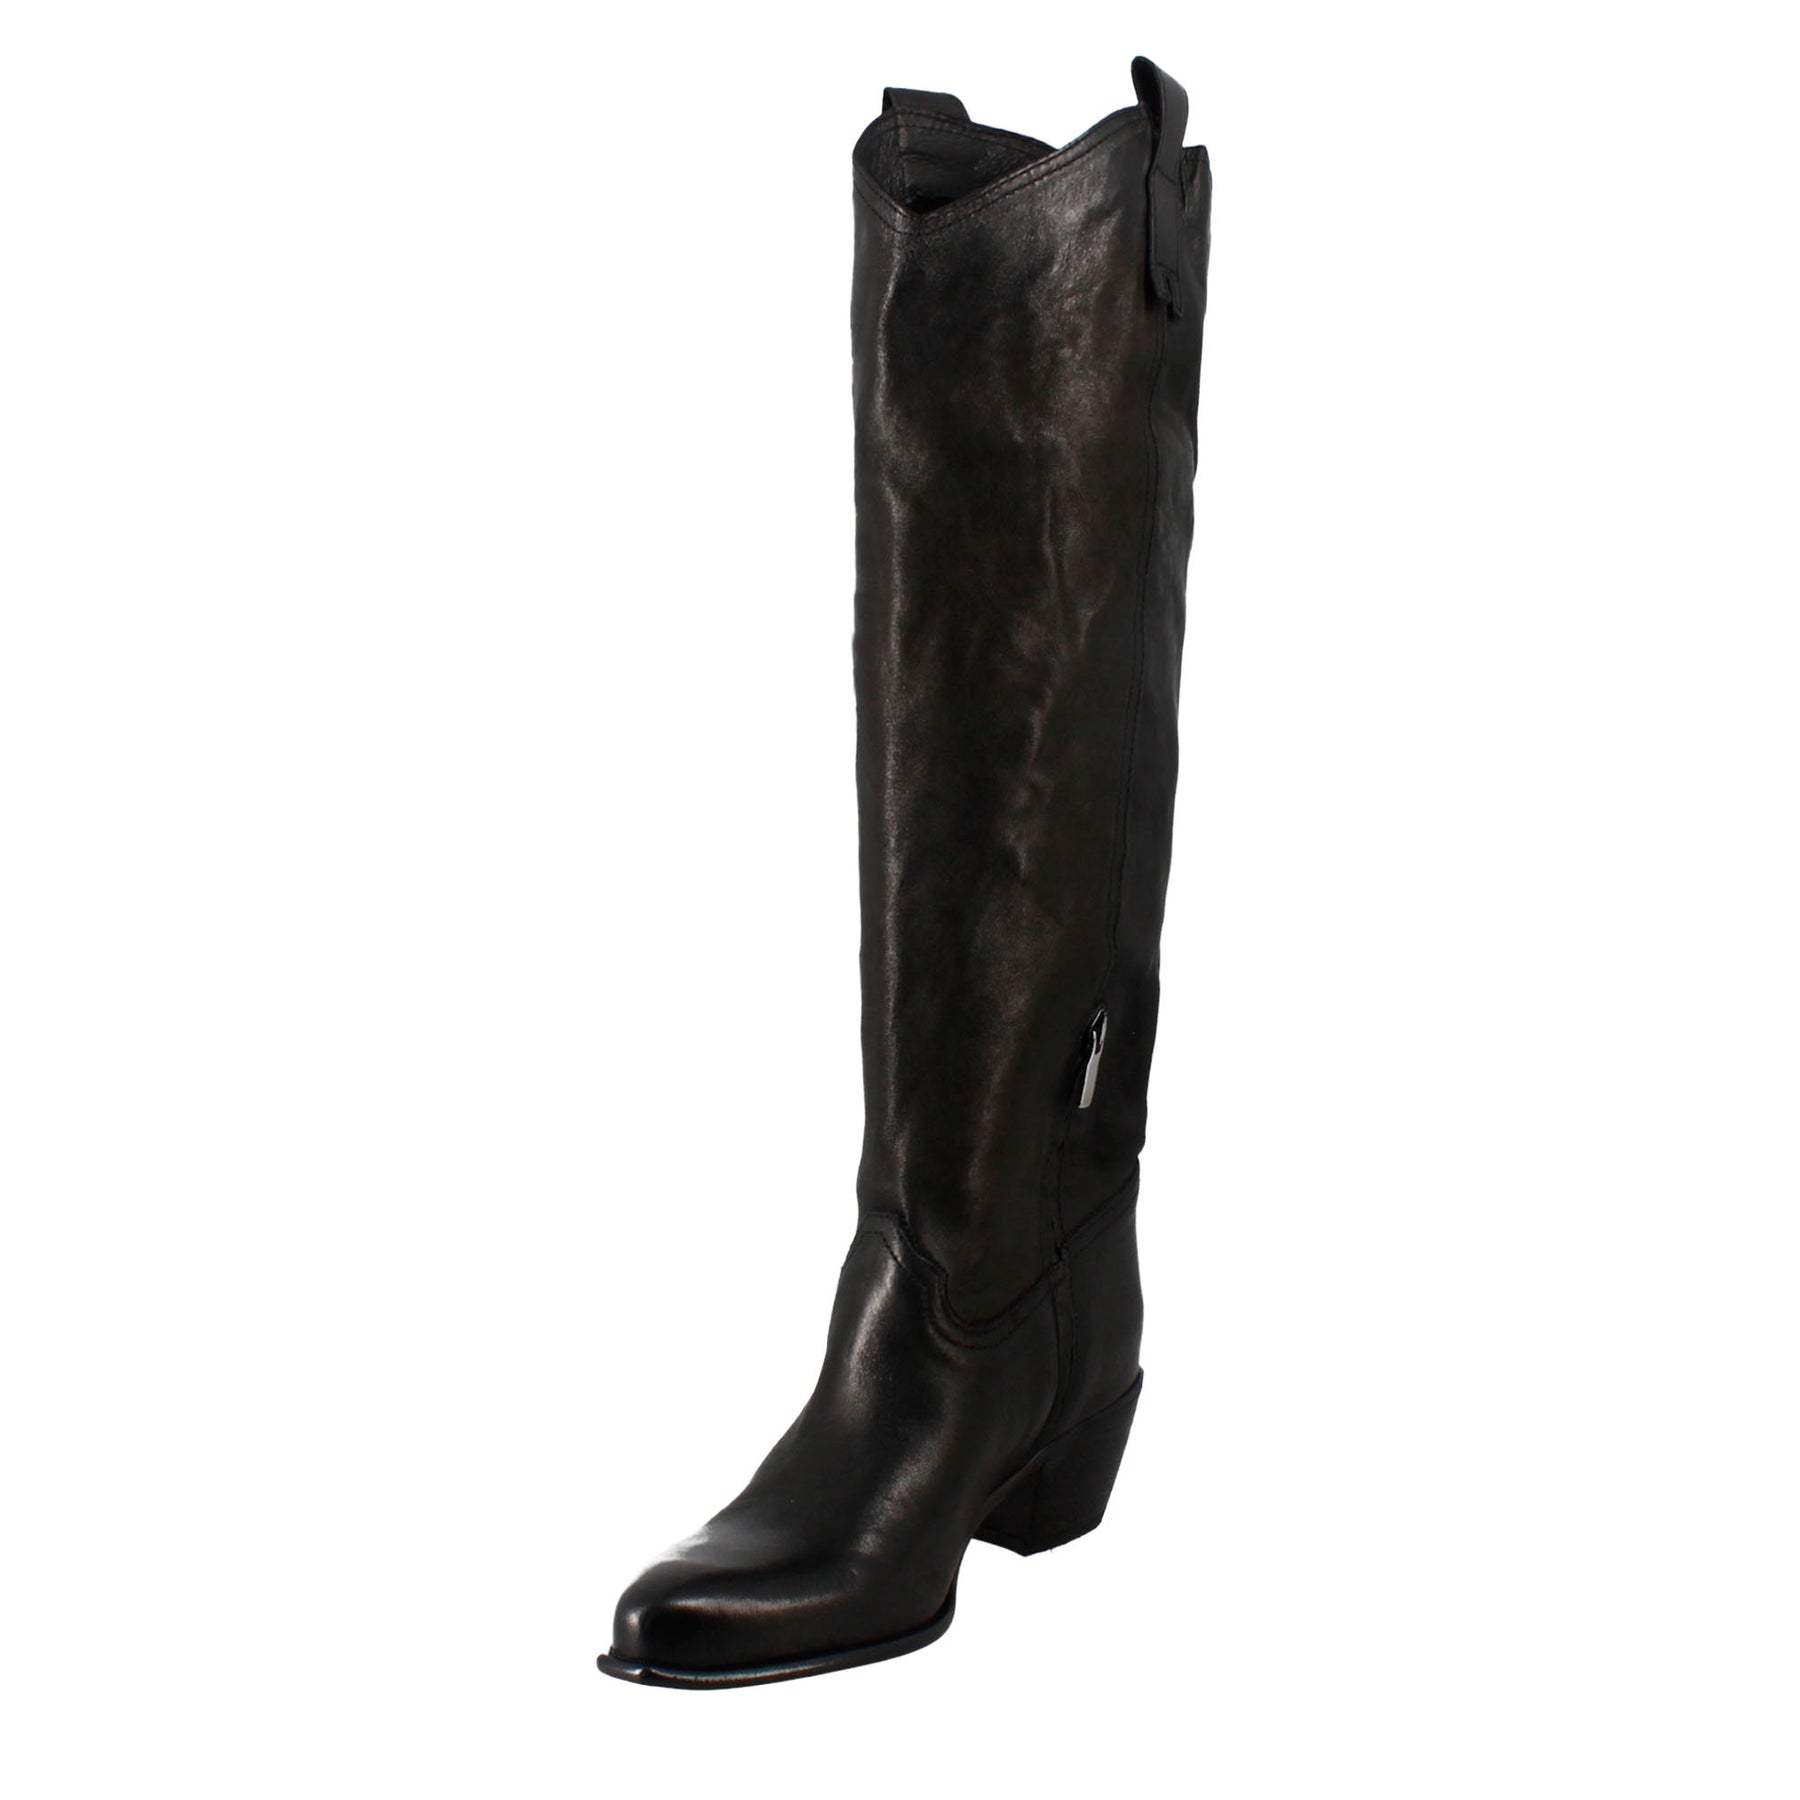 Women's handmade high Texan boots in black leather with zipper